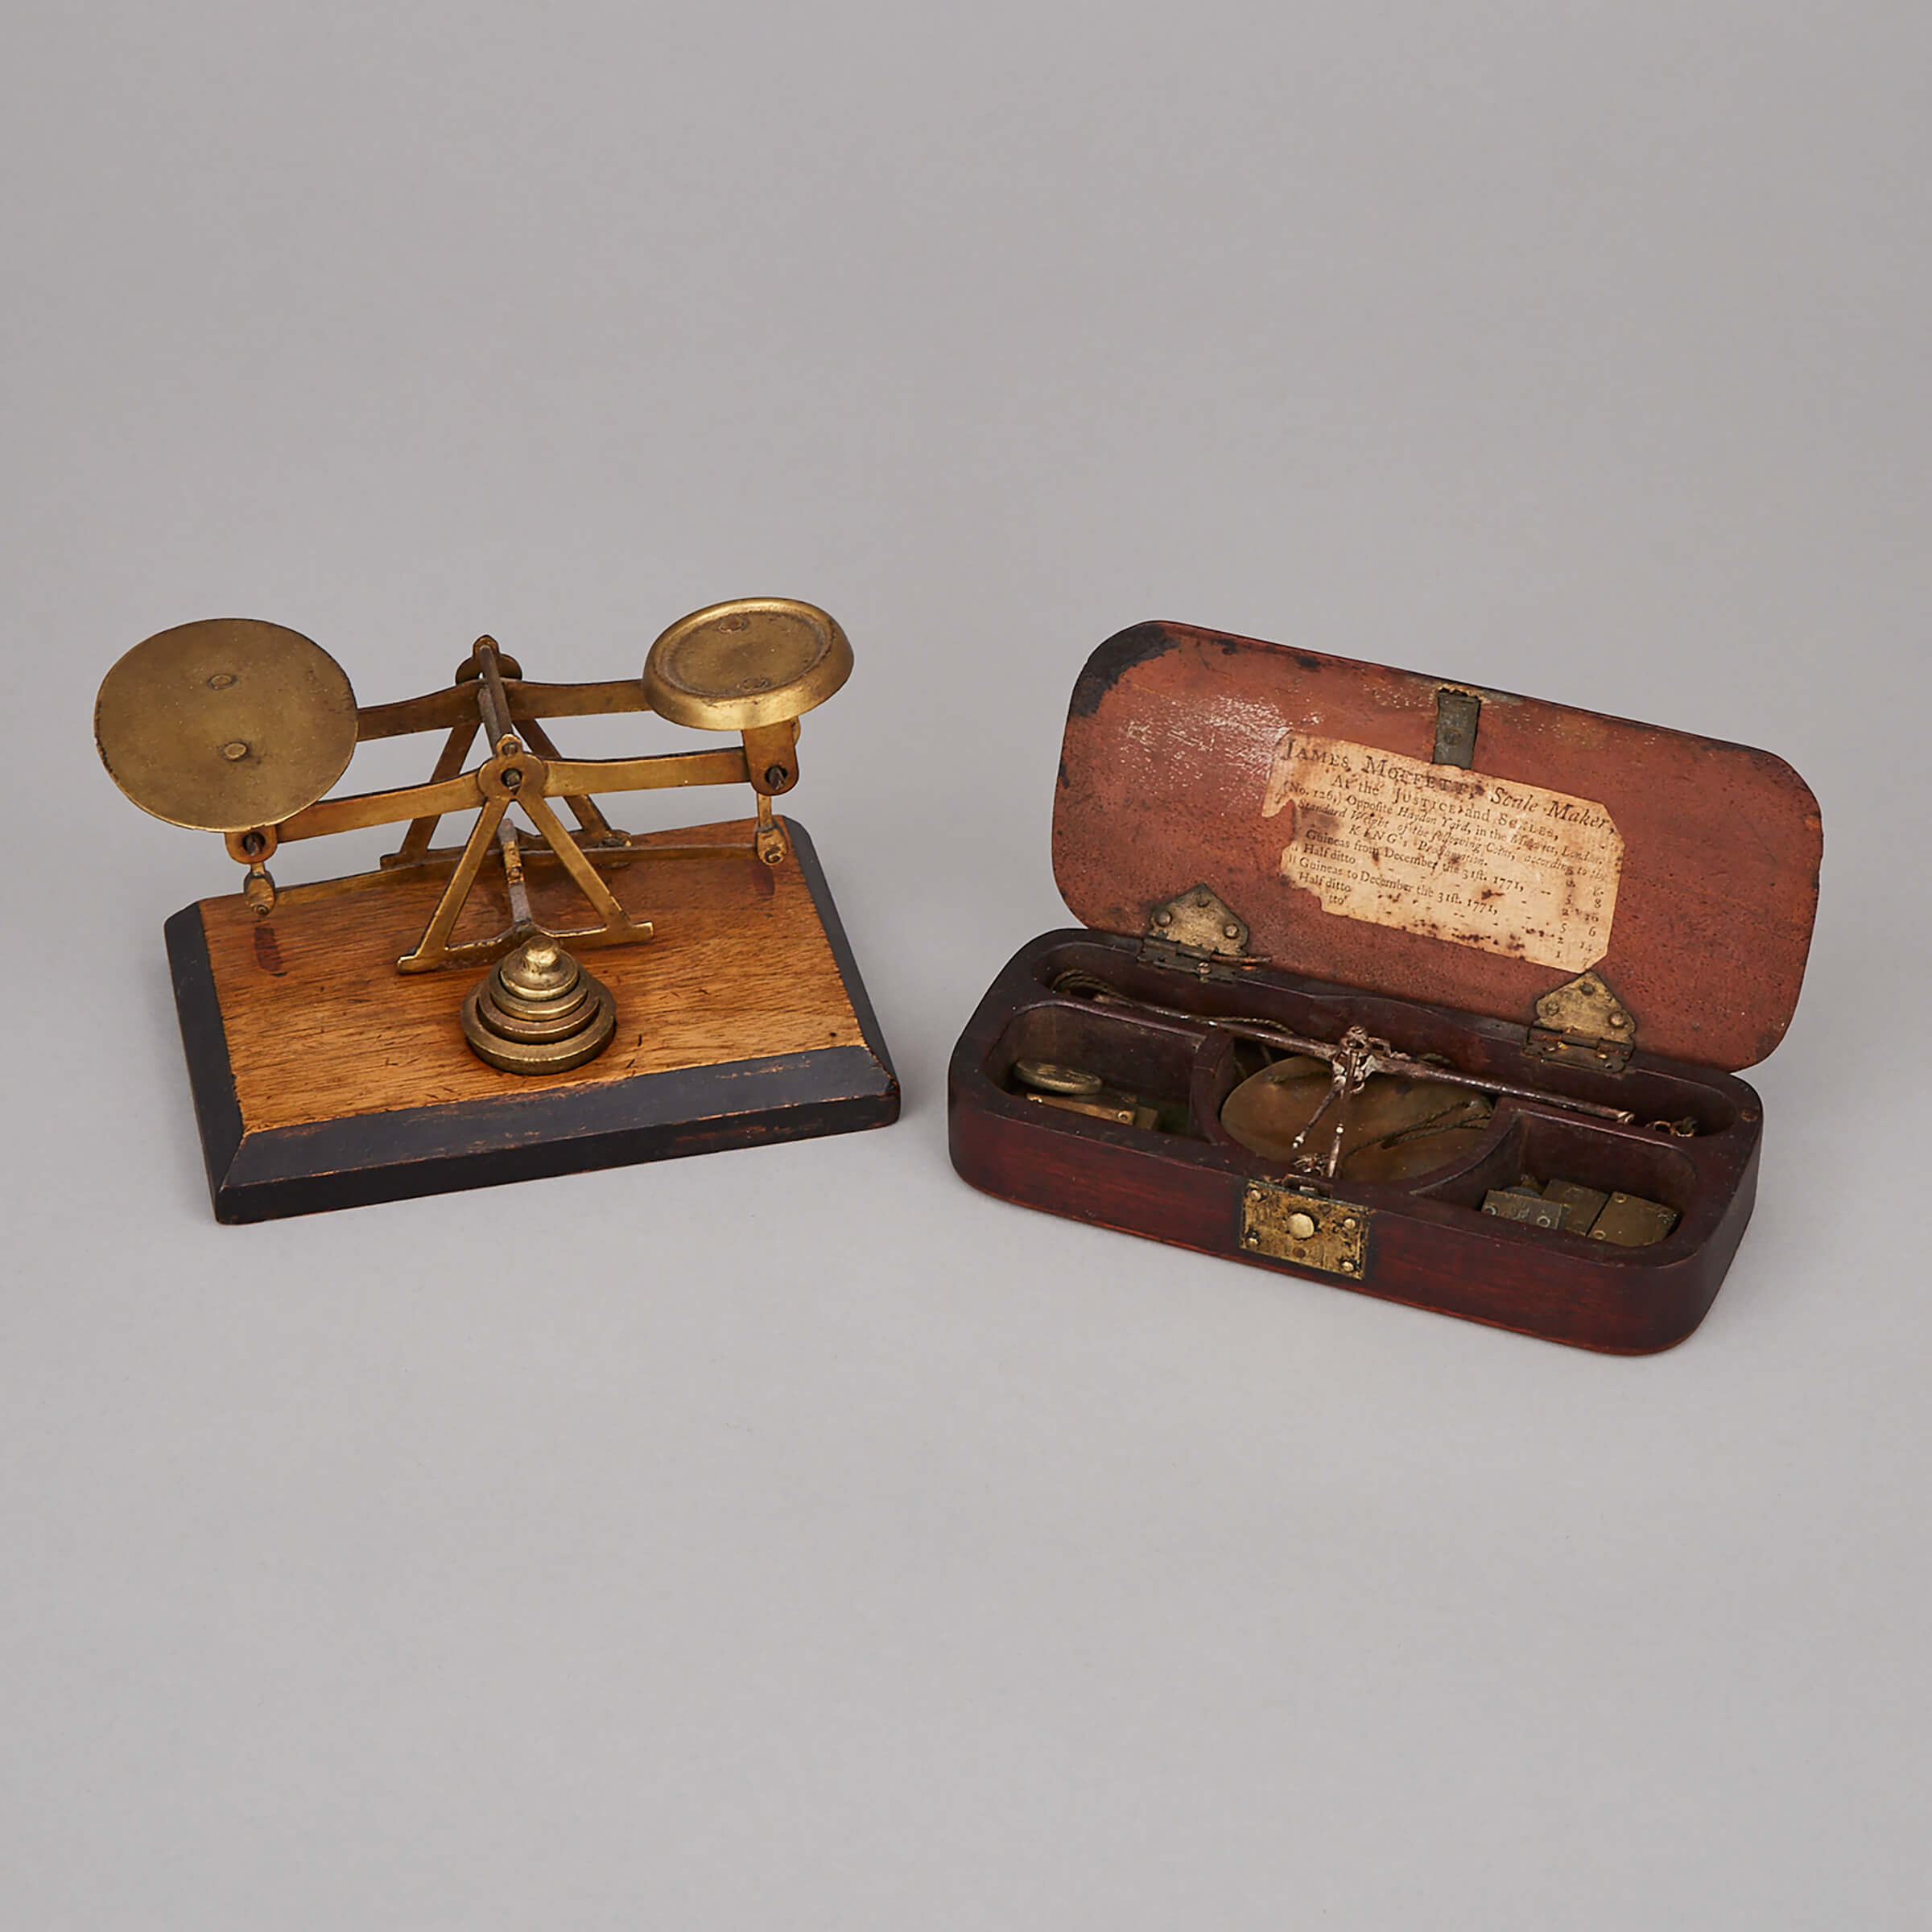 Two English Scales: Cased Guinea Scales, James Moffett, London, c.1771, and a Victorian Letter Scale, late 19th century